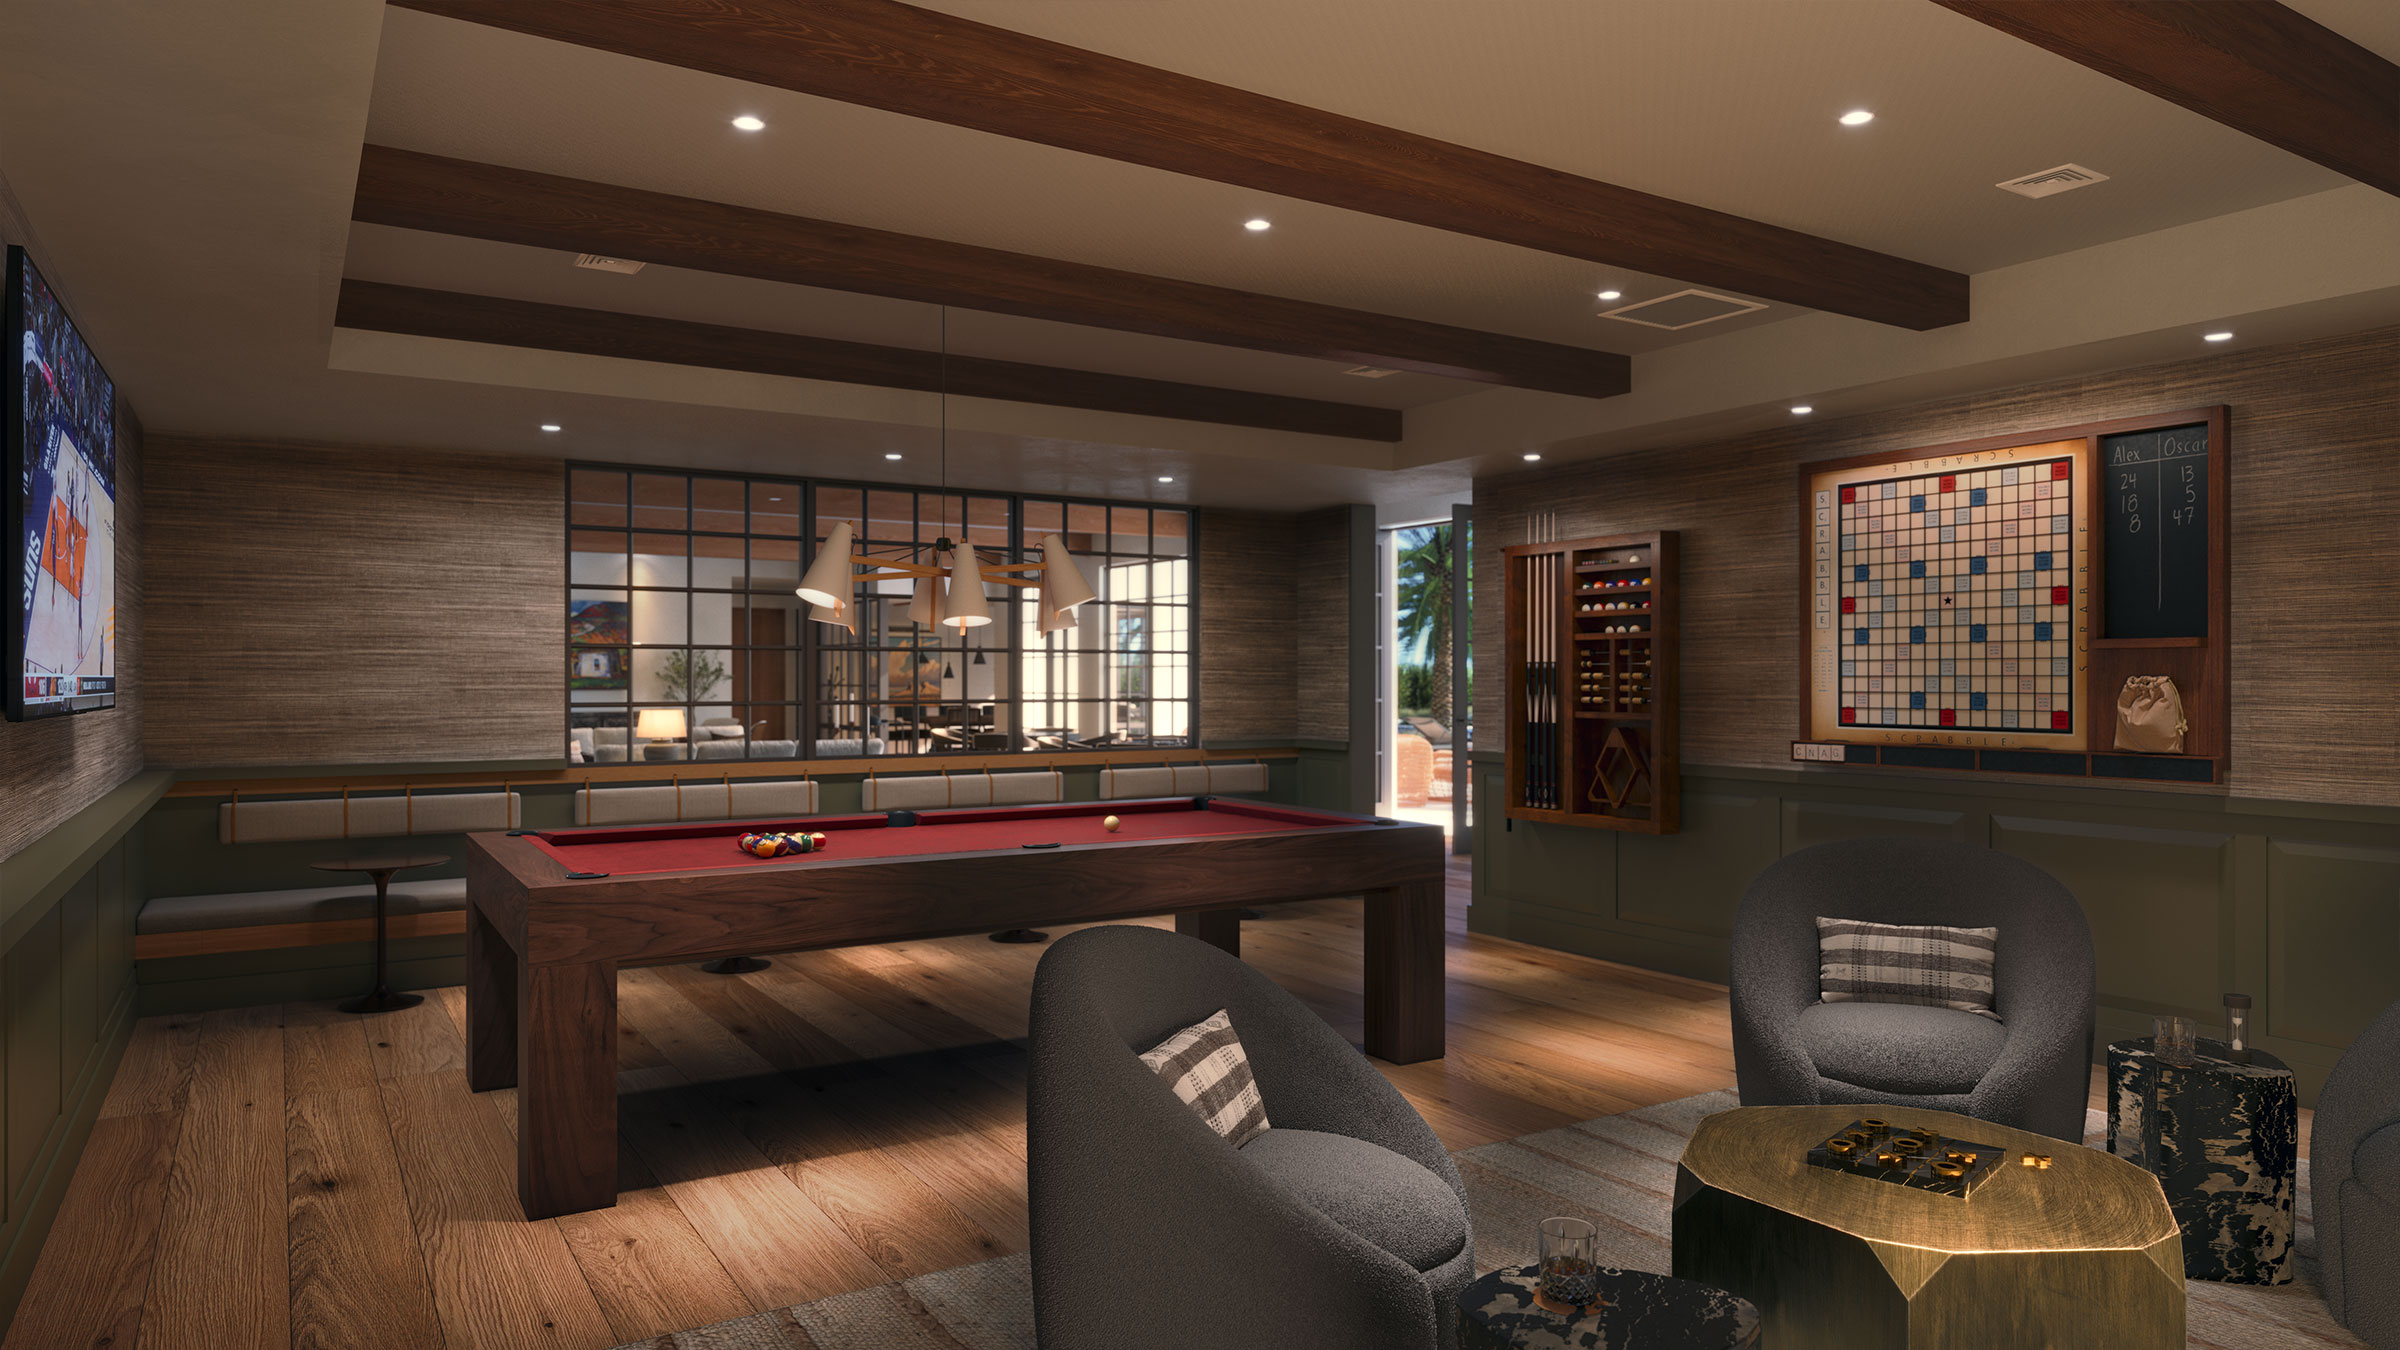 Enjoy hours of entertainment in the spacious and stylish games room.